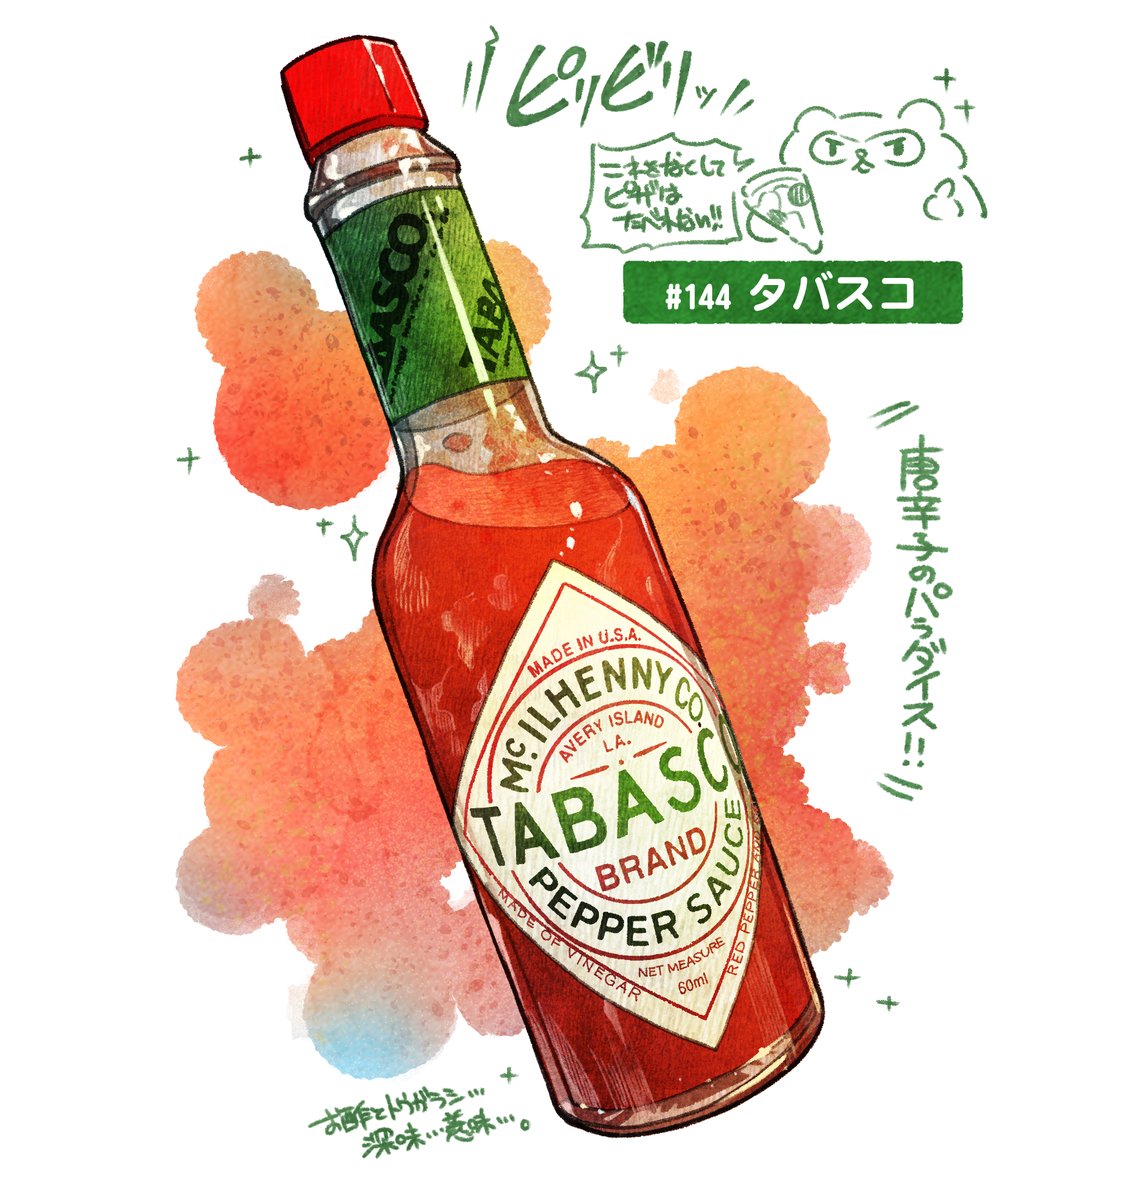 Day142-145.Sweet and spicy

甘いものと辛いもの。 